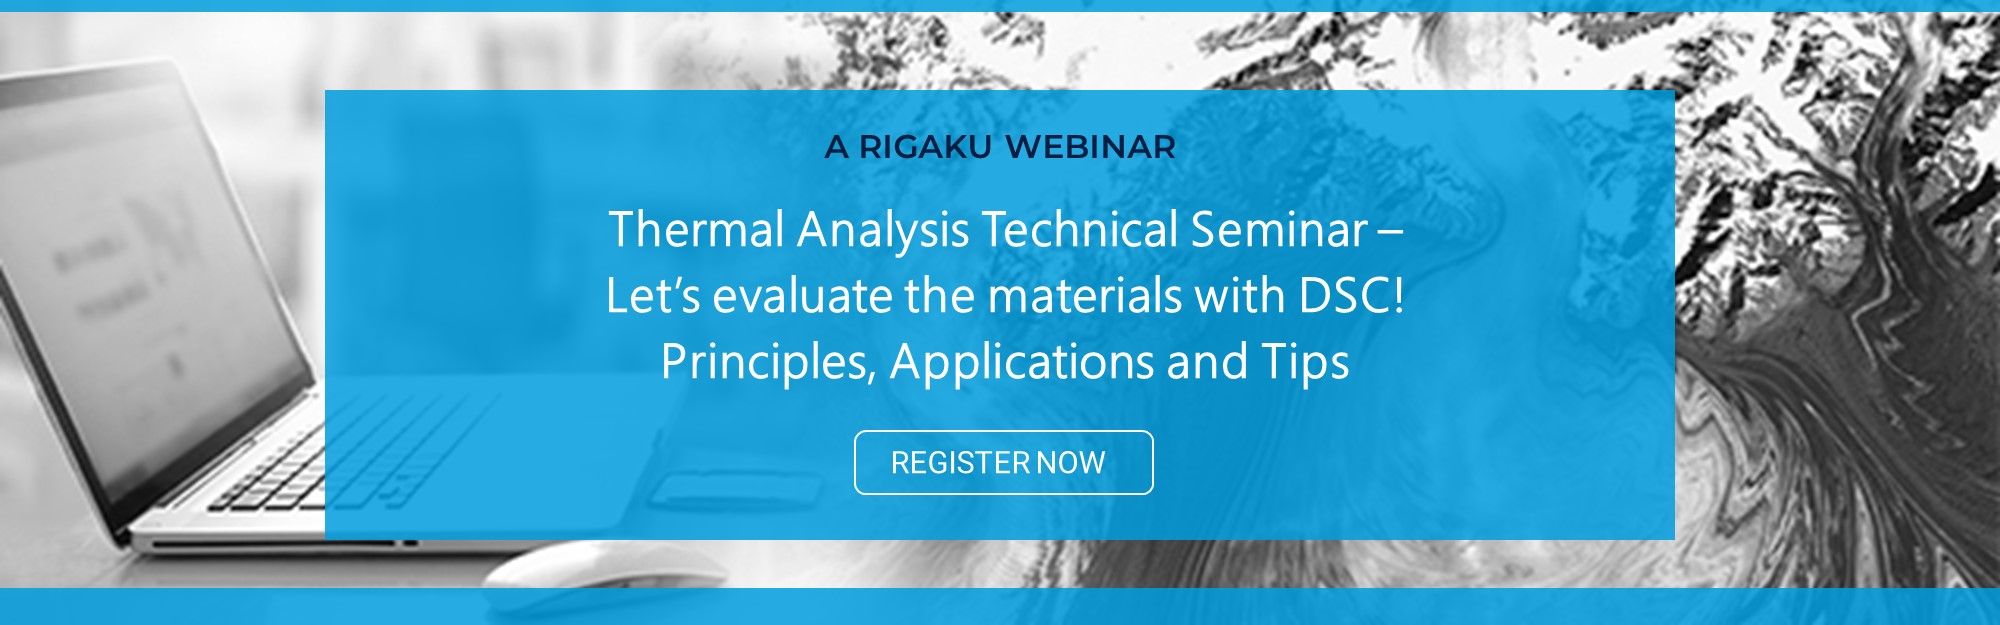 Thermal Analysis Technical Seminar – Let’s evaluate the materials with DSC! Principles, Applications and Tips